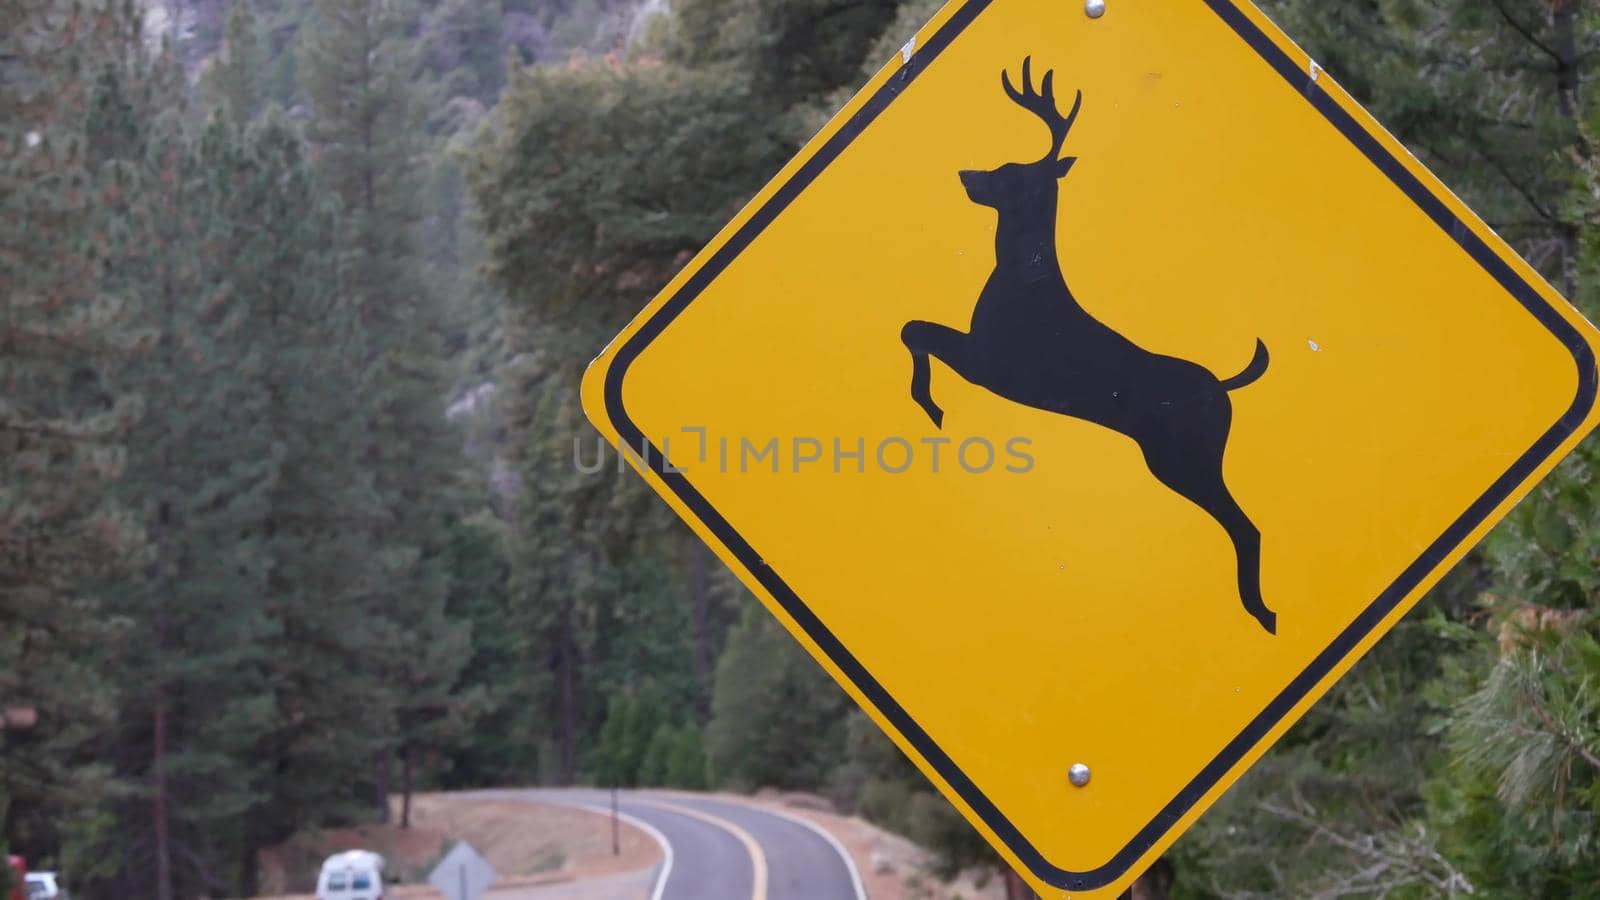 Deer crossing warning yellow sign, California USA. Wild animals xing traffic signage for safety driving on road. Wildlife fauna protection from cars in Yosemite national park forest. Road trip concept